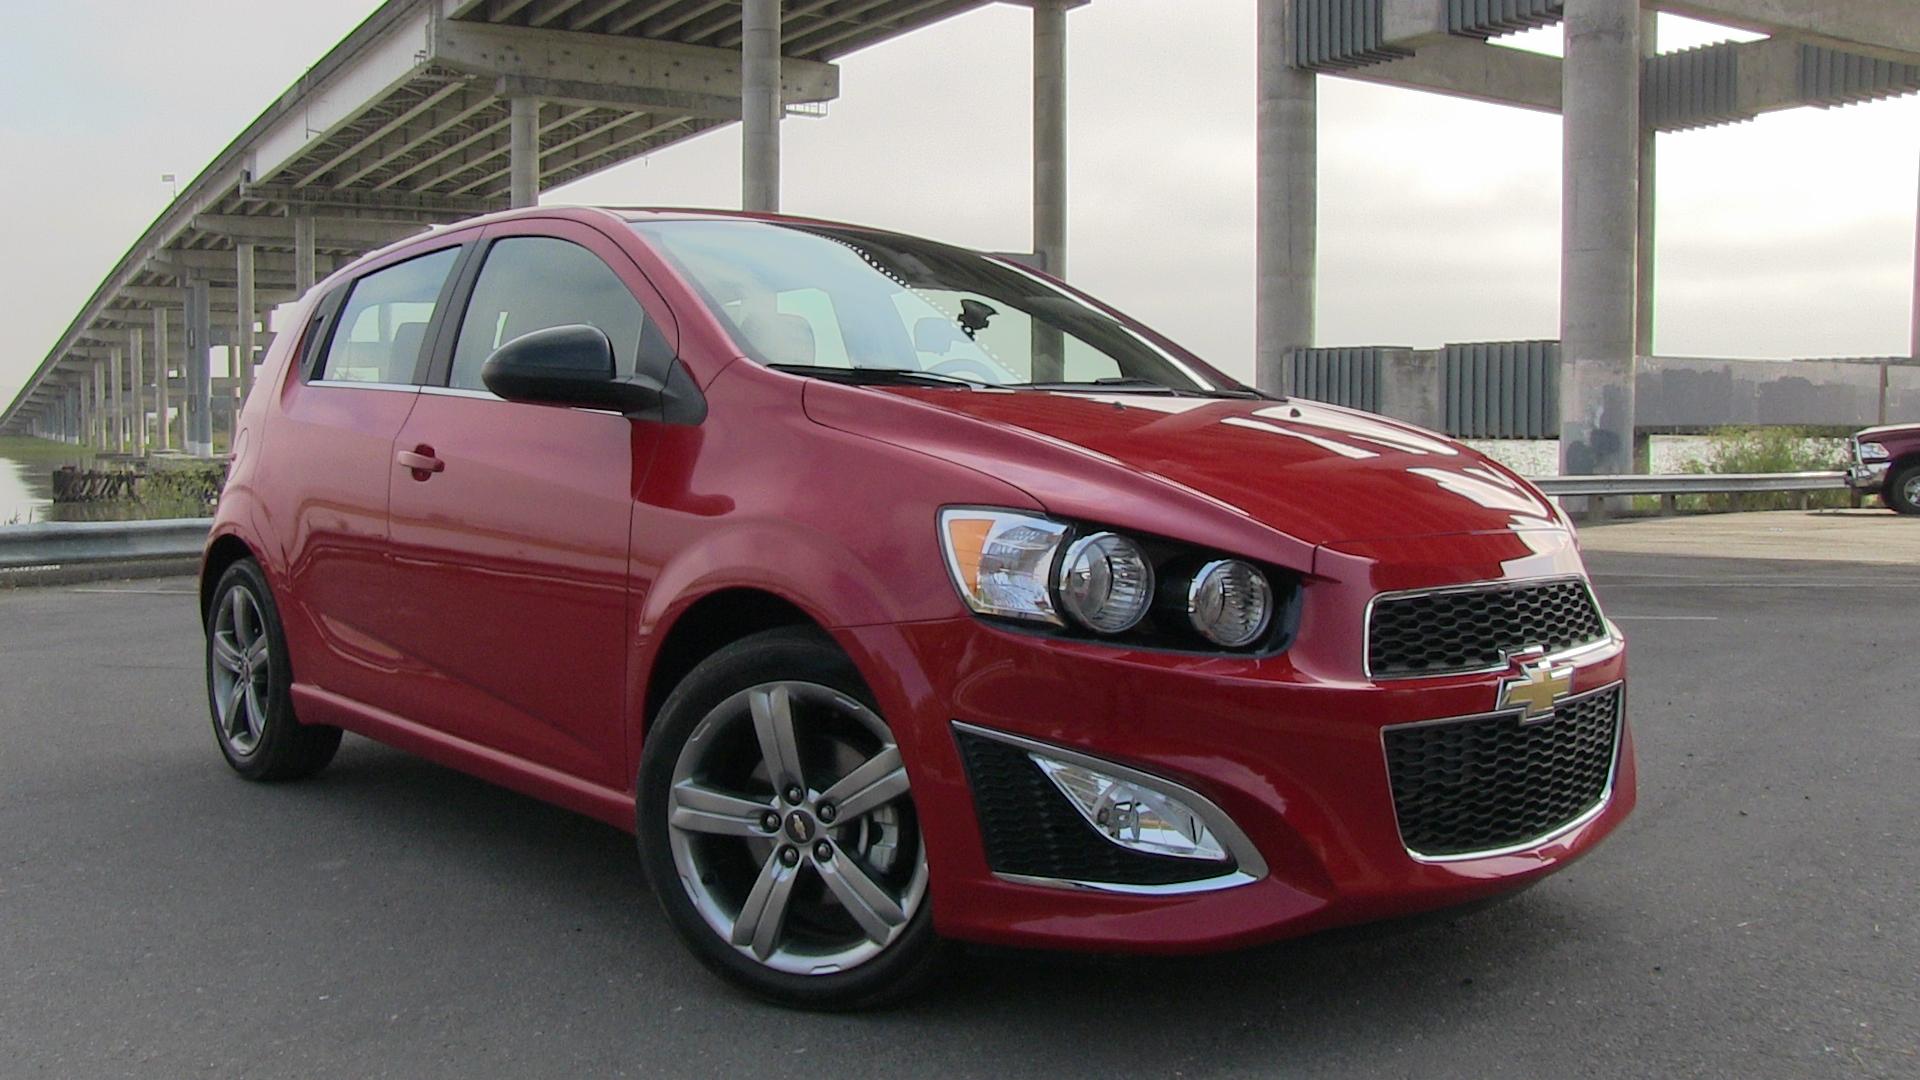 Chevrolet Sonic Wallpapers Wallpaper Cave